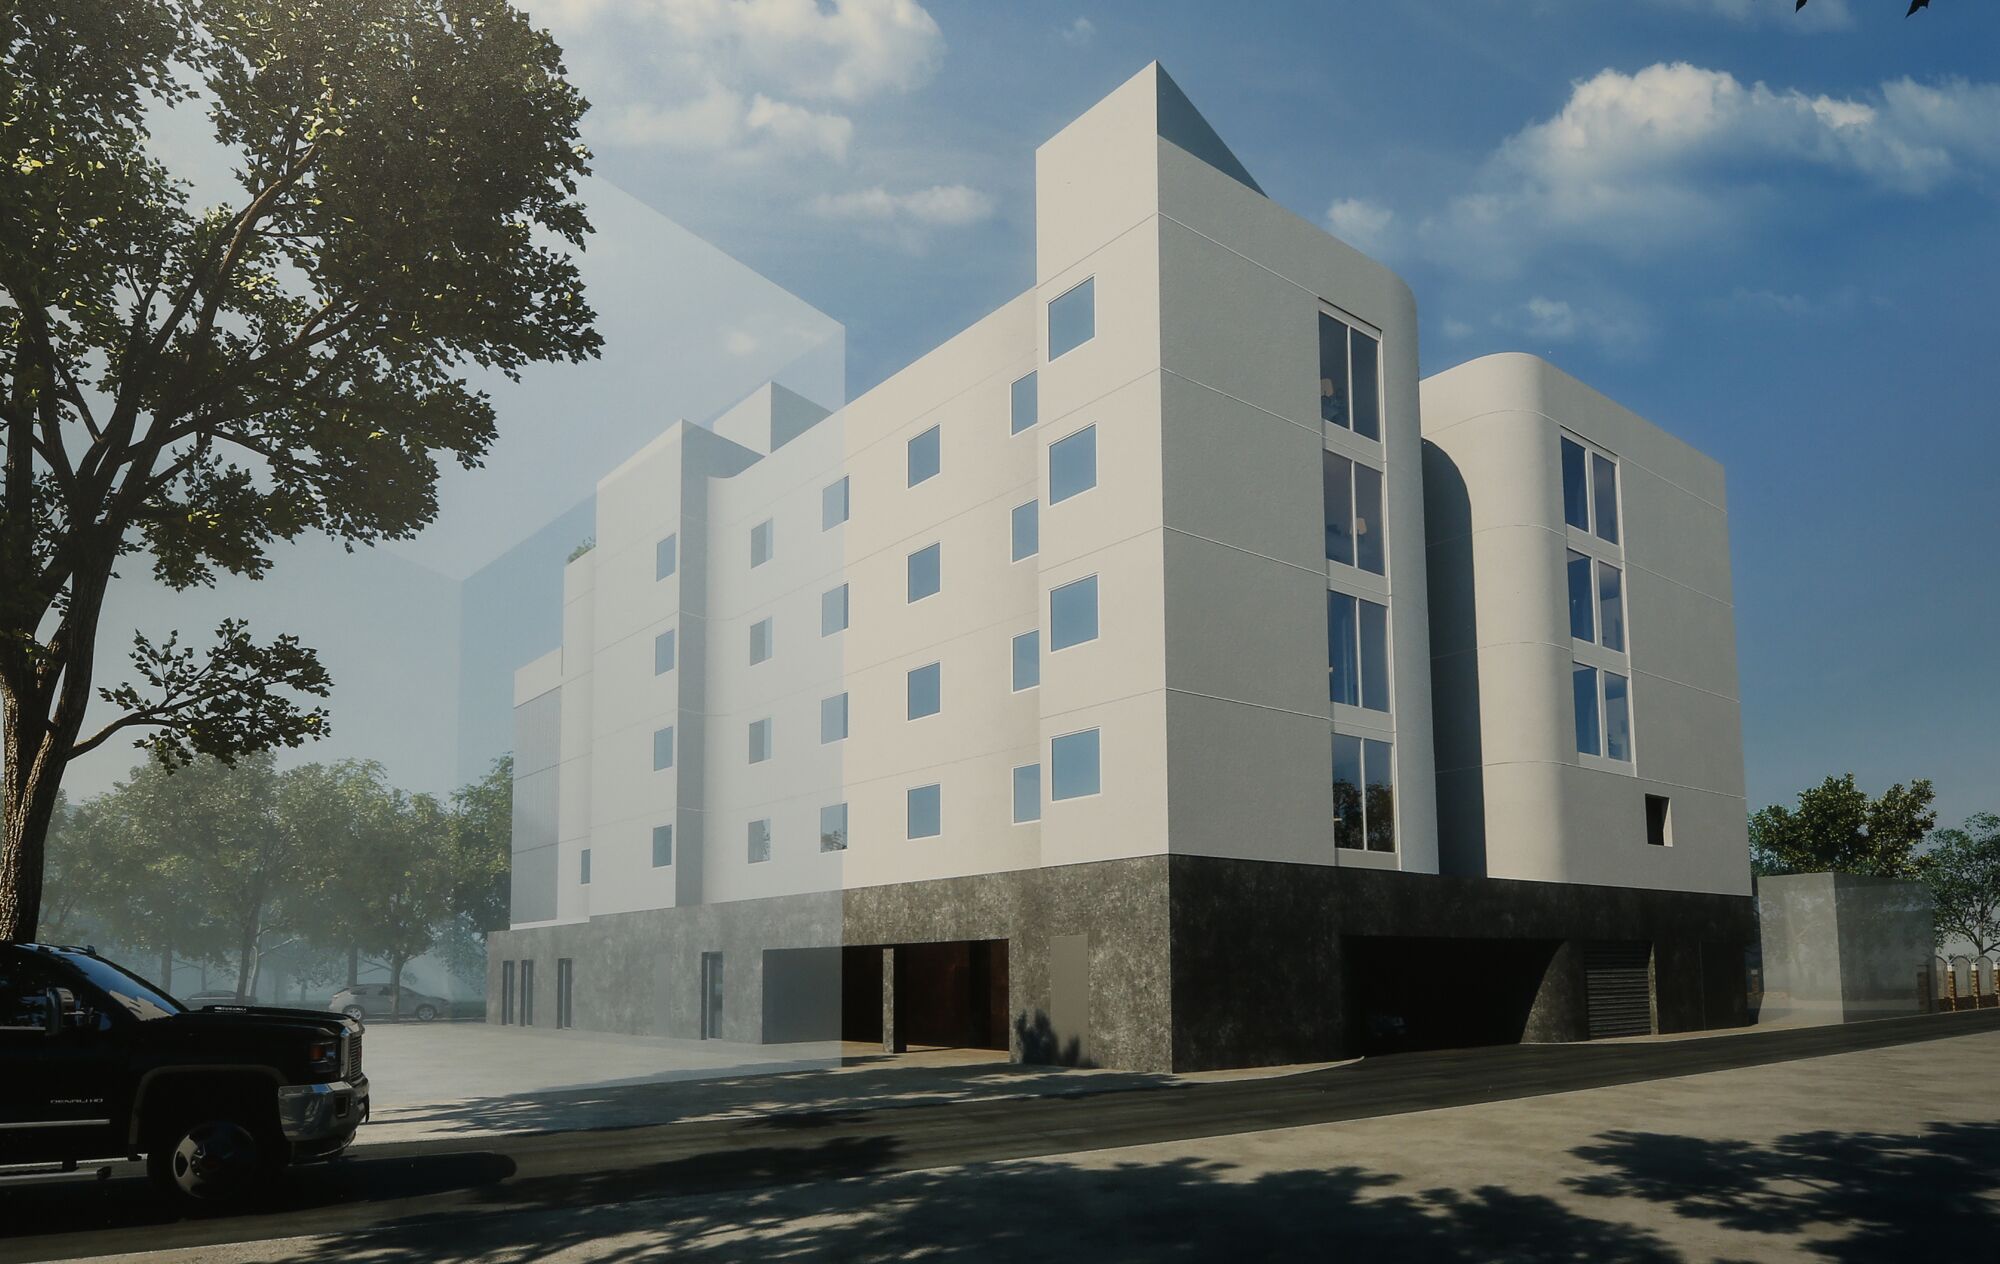  Artist rendering of a proposed five-story permanent supportive housing development 